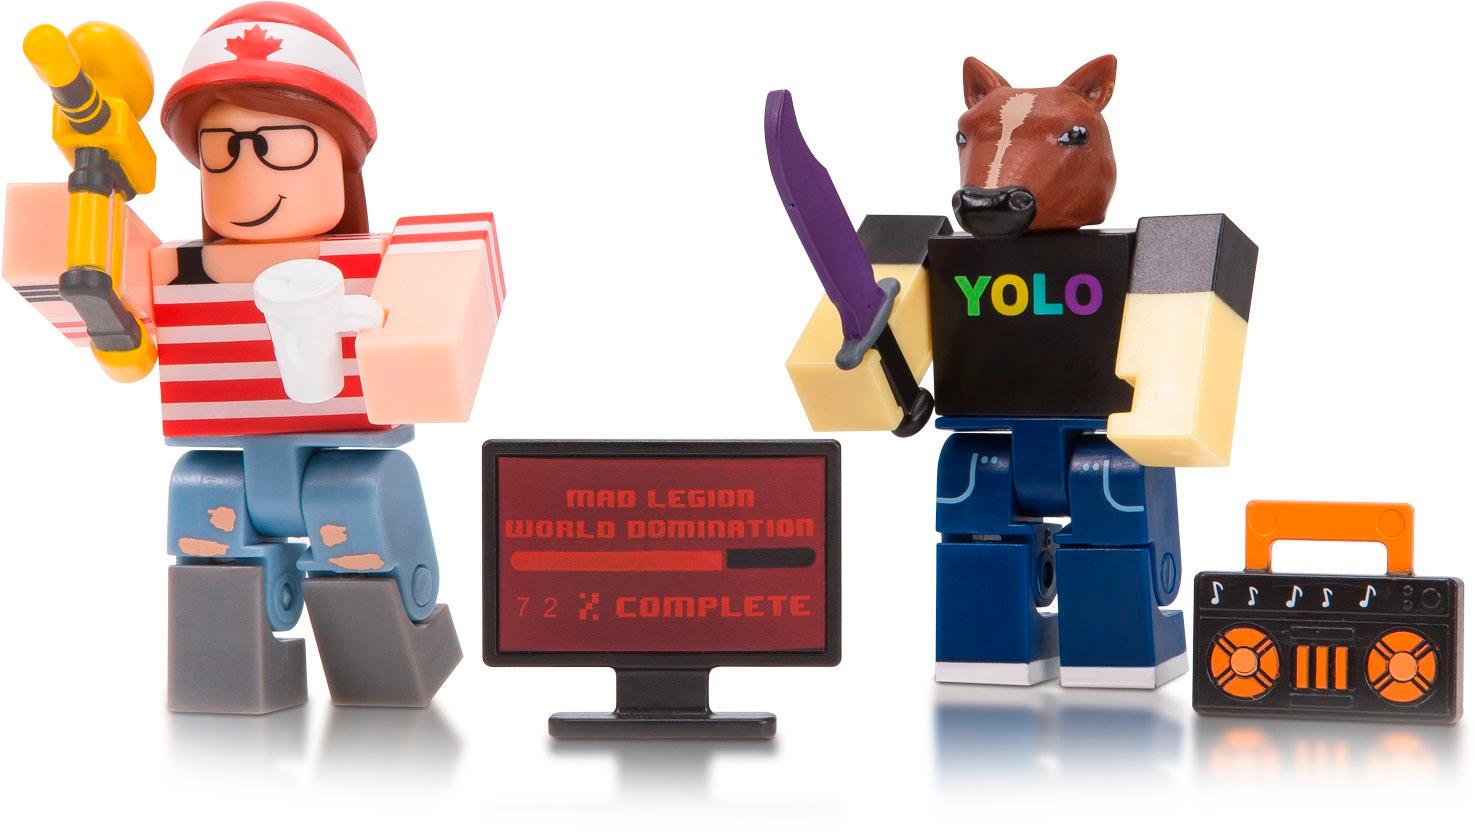 Chic Geek Diary: Roblox Series 5 Toys - Review & Giveaway